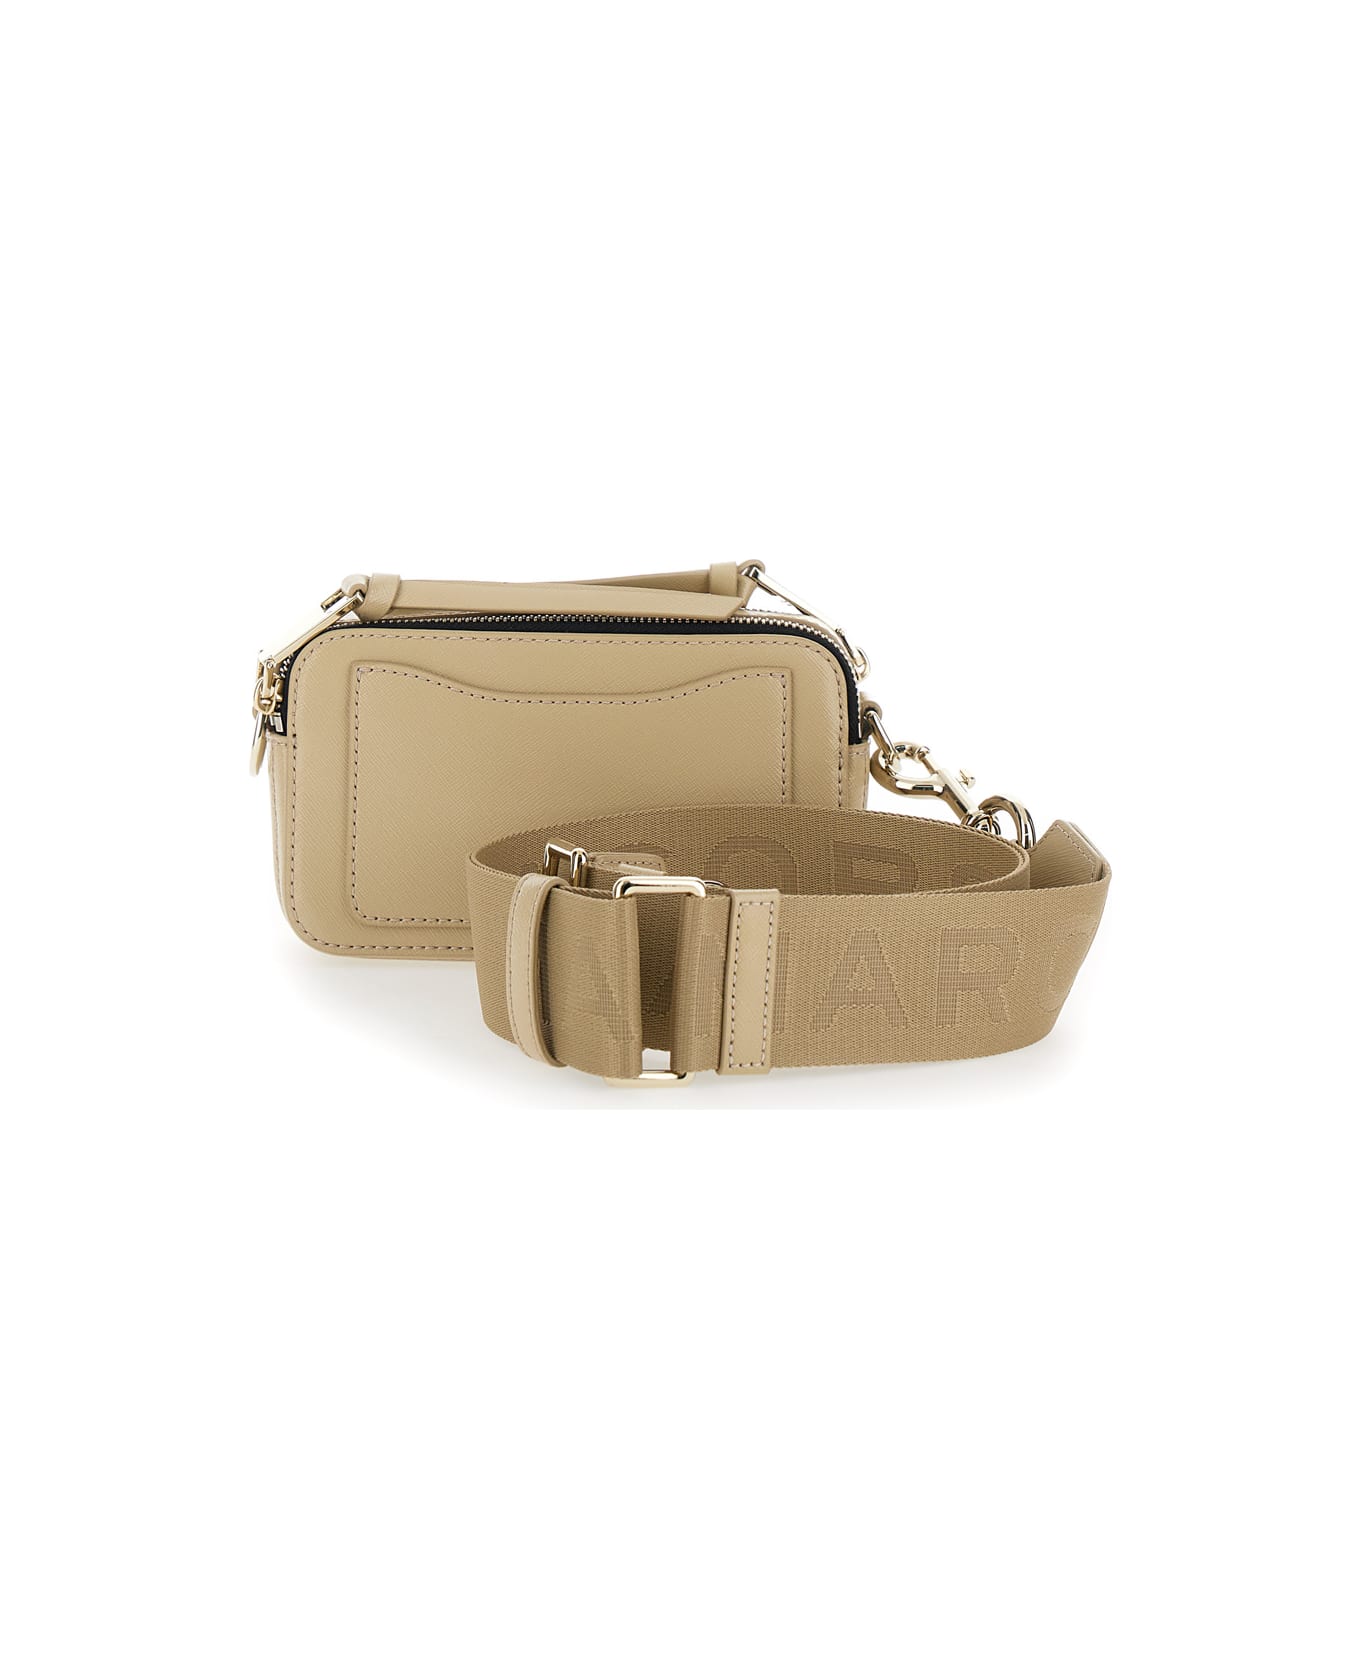 Marc Jacobs 'the Snapshot' Beige Shoulder Bag With Metal Logo At The Front In Leather Woman - Beige ショルダーバッグ